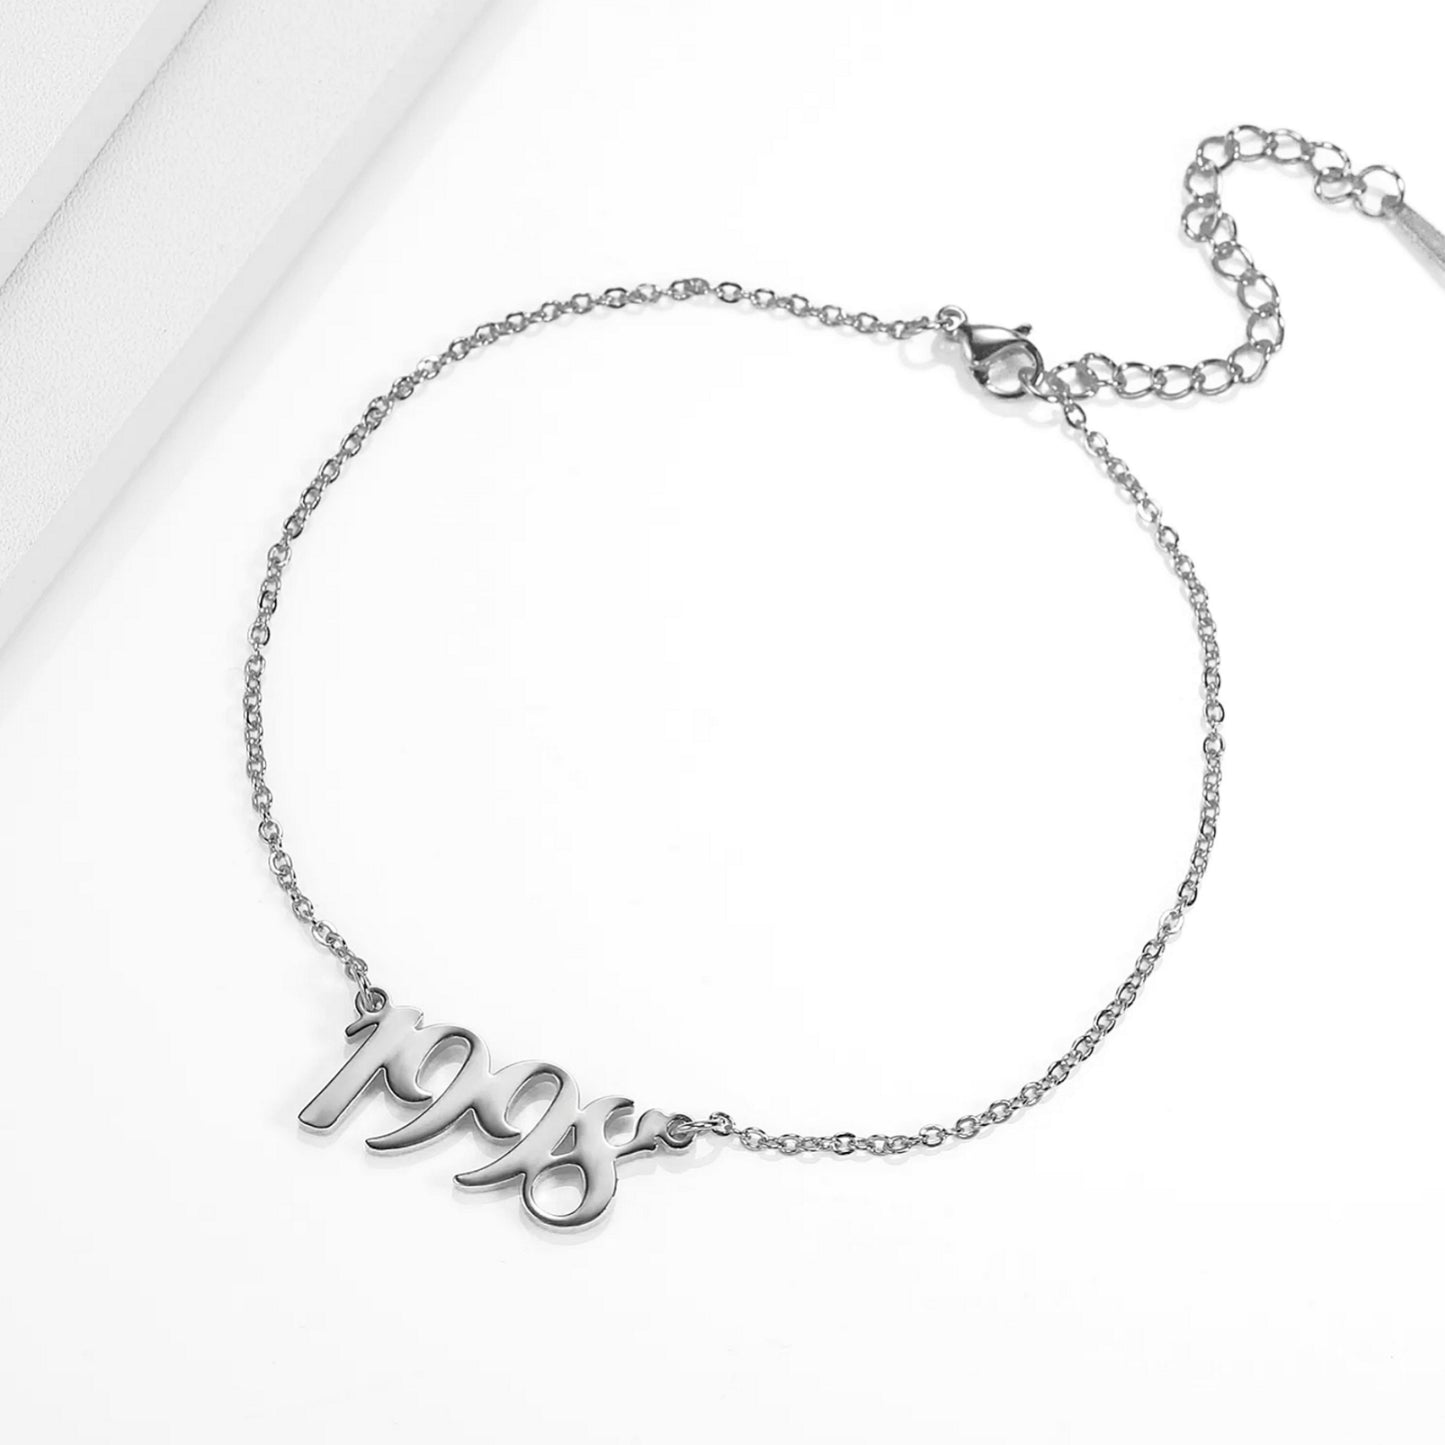 Personalised Special Number Anklet - Link Chain - Anaya Arabic English Numeral Jewellery Gift  -  SHAZIA